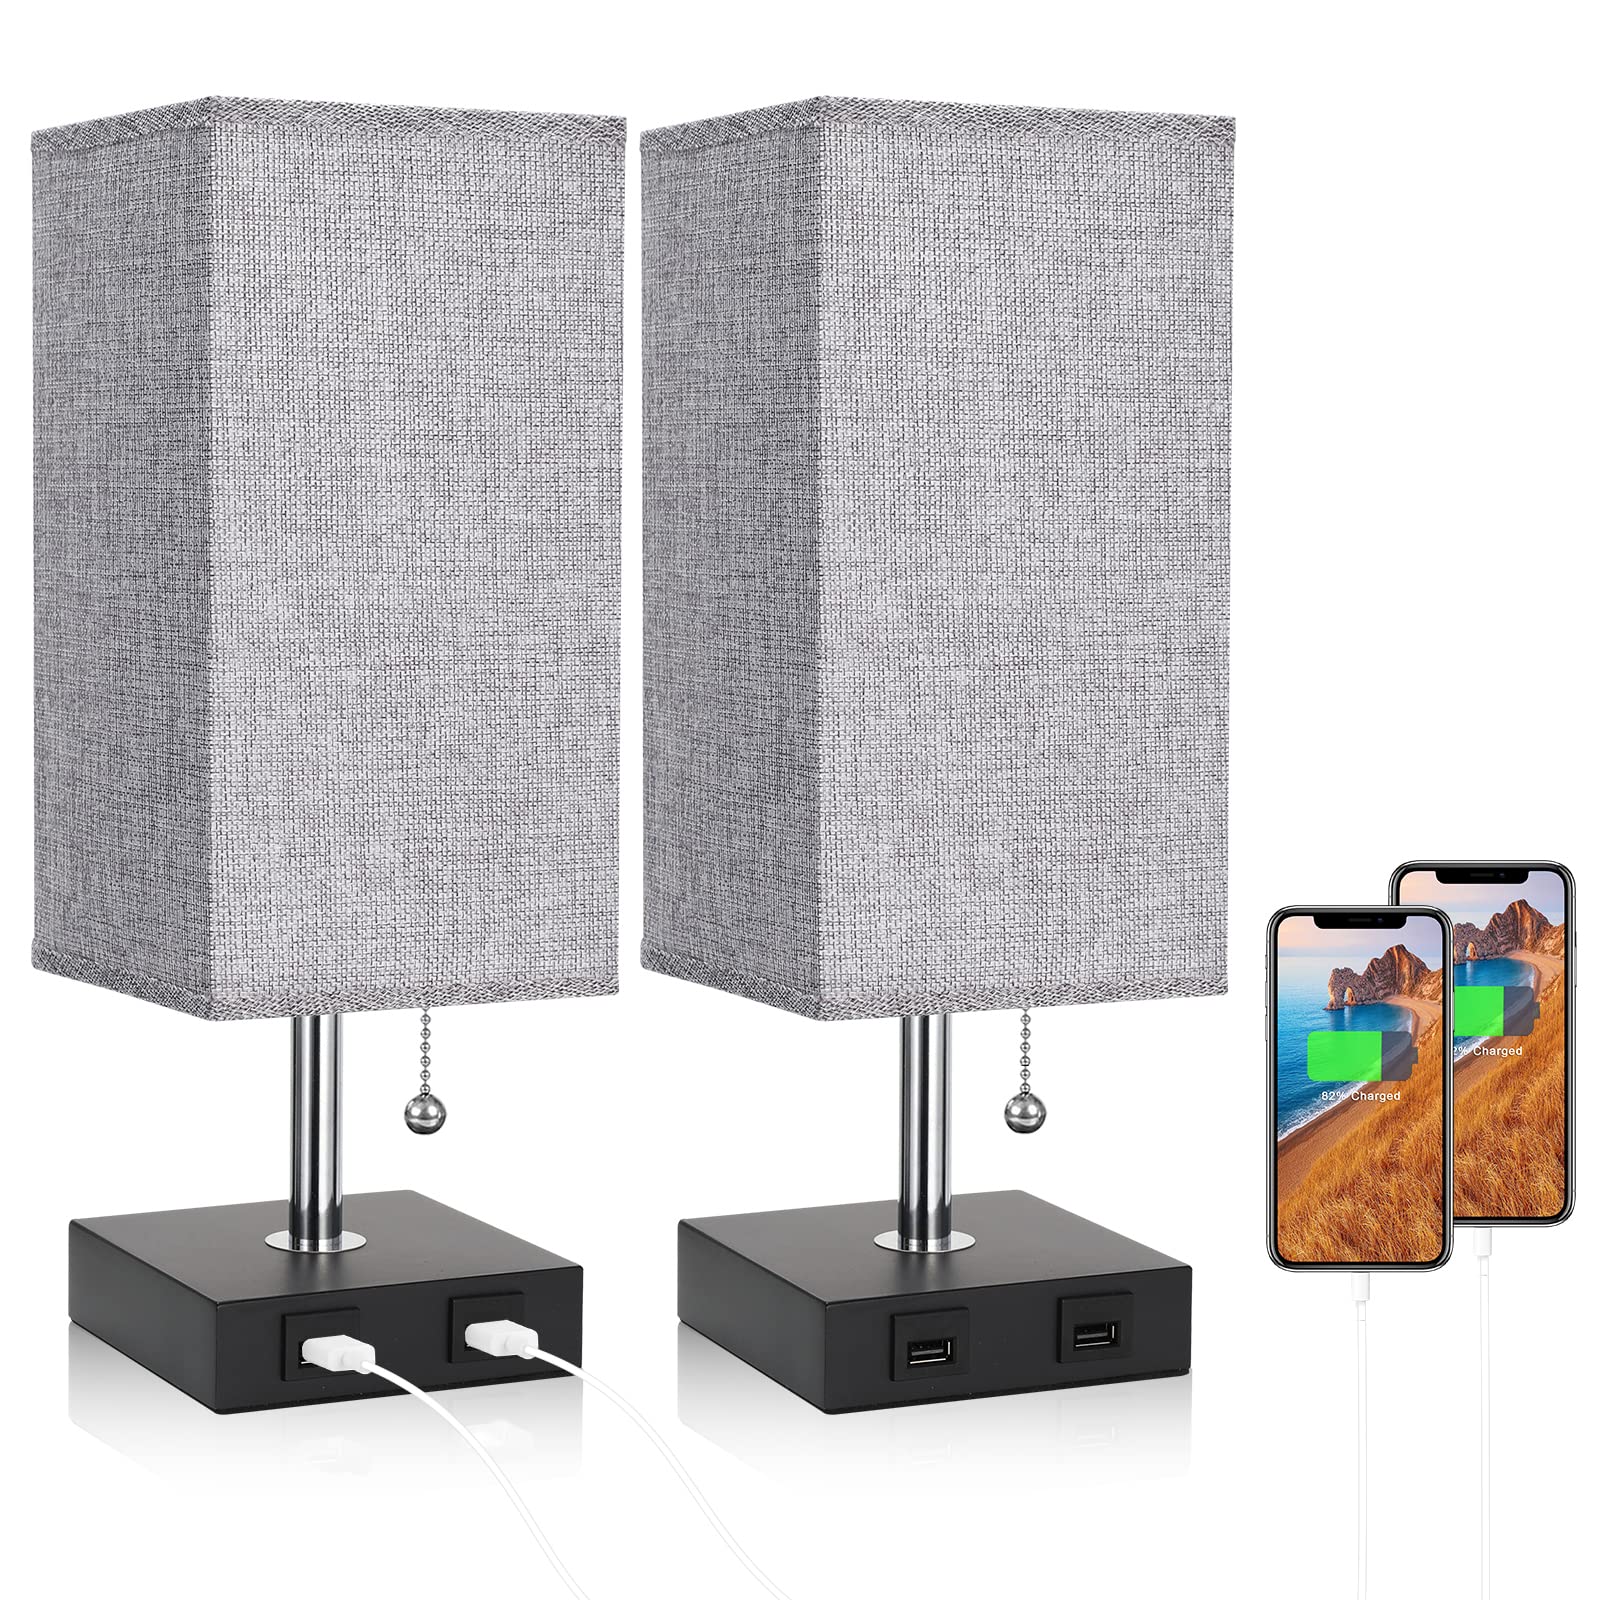 Bedside Lamps for Bedrooms Set of 2 - Table Lamps for Nightstand with USB Ports, Small Night Stand Light Lamp with Grey Fabric Shade for End Table Living Room Home Office Study Room (2 Pack)